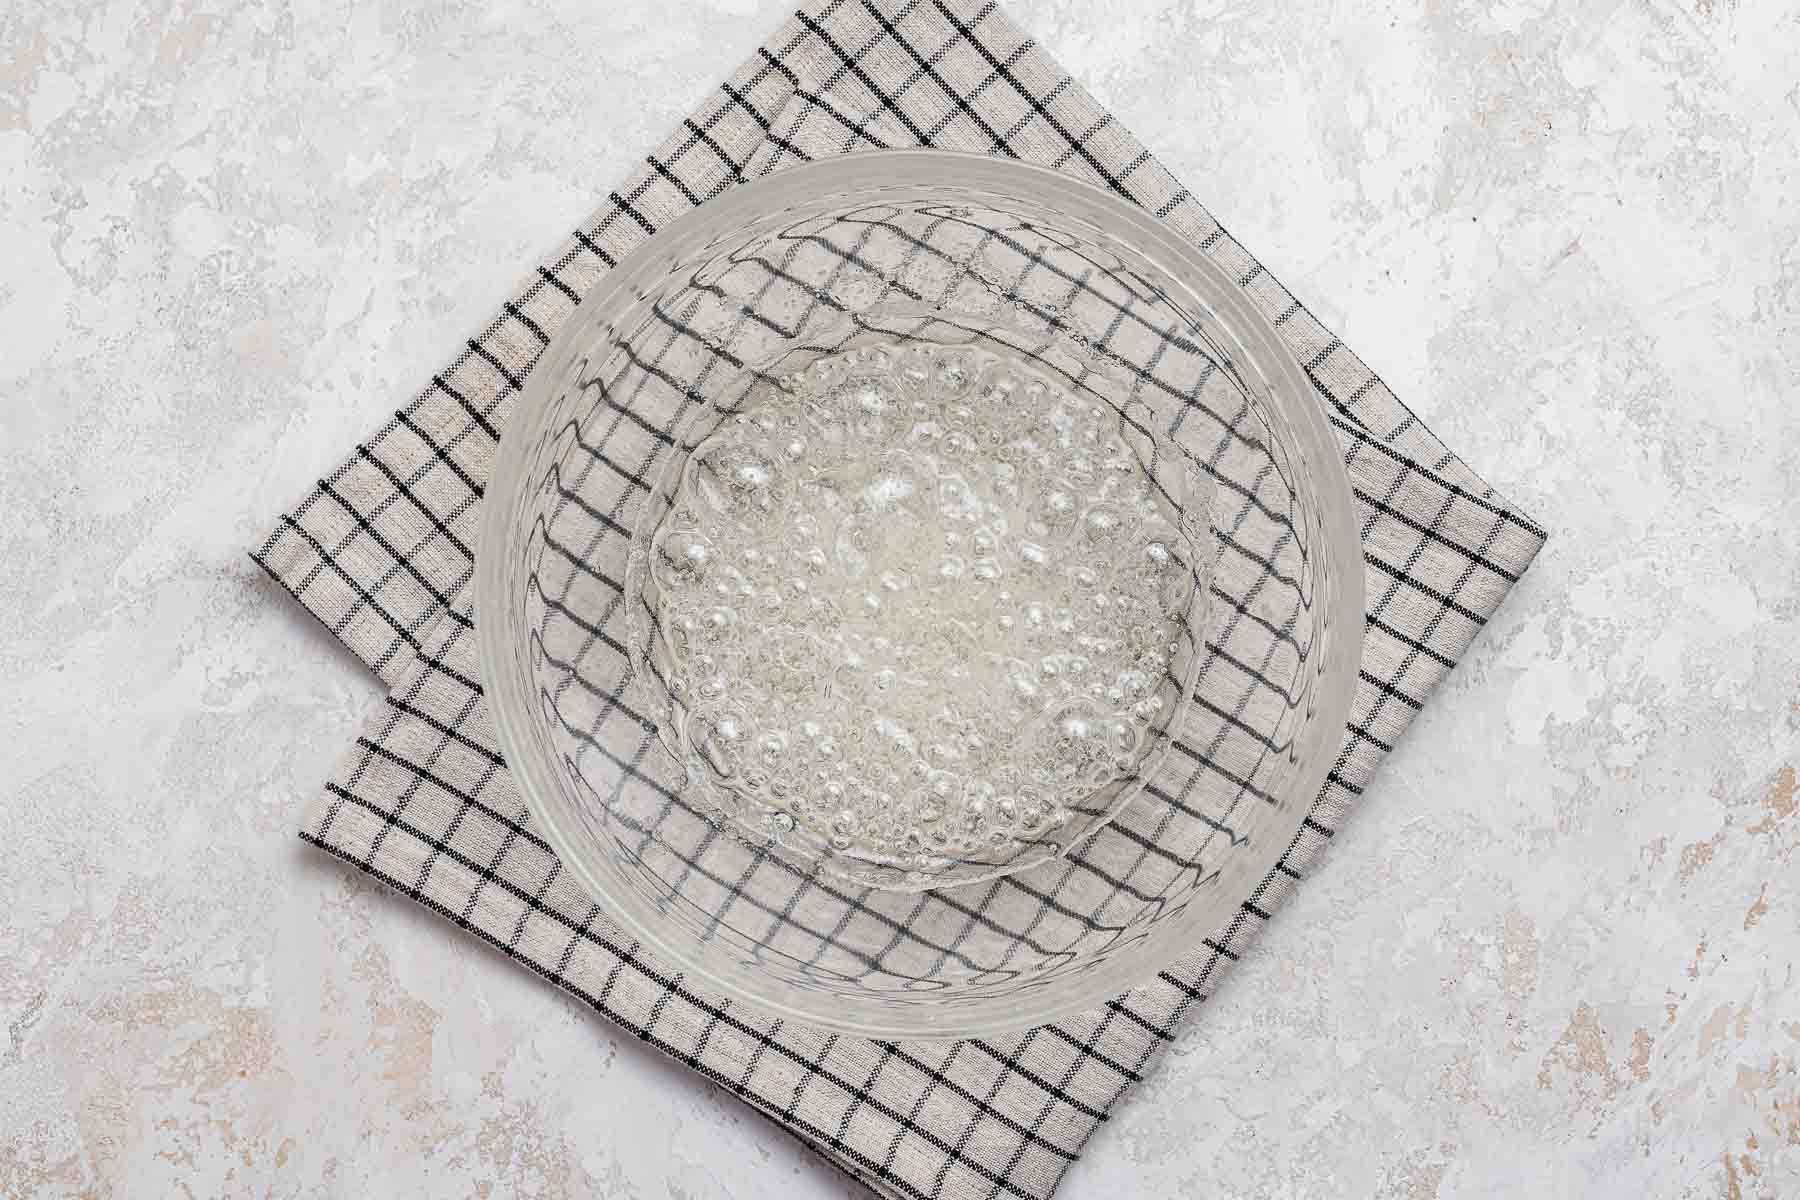 Boiling sugar in clear glass bowl.